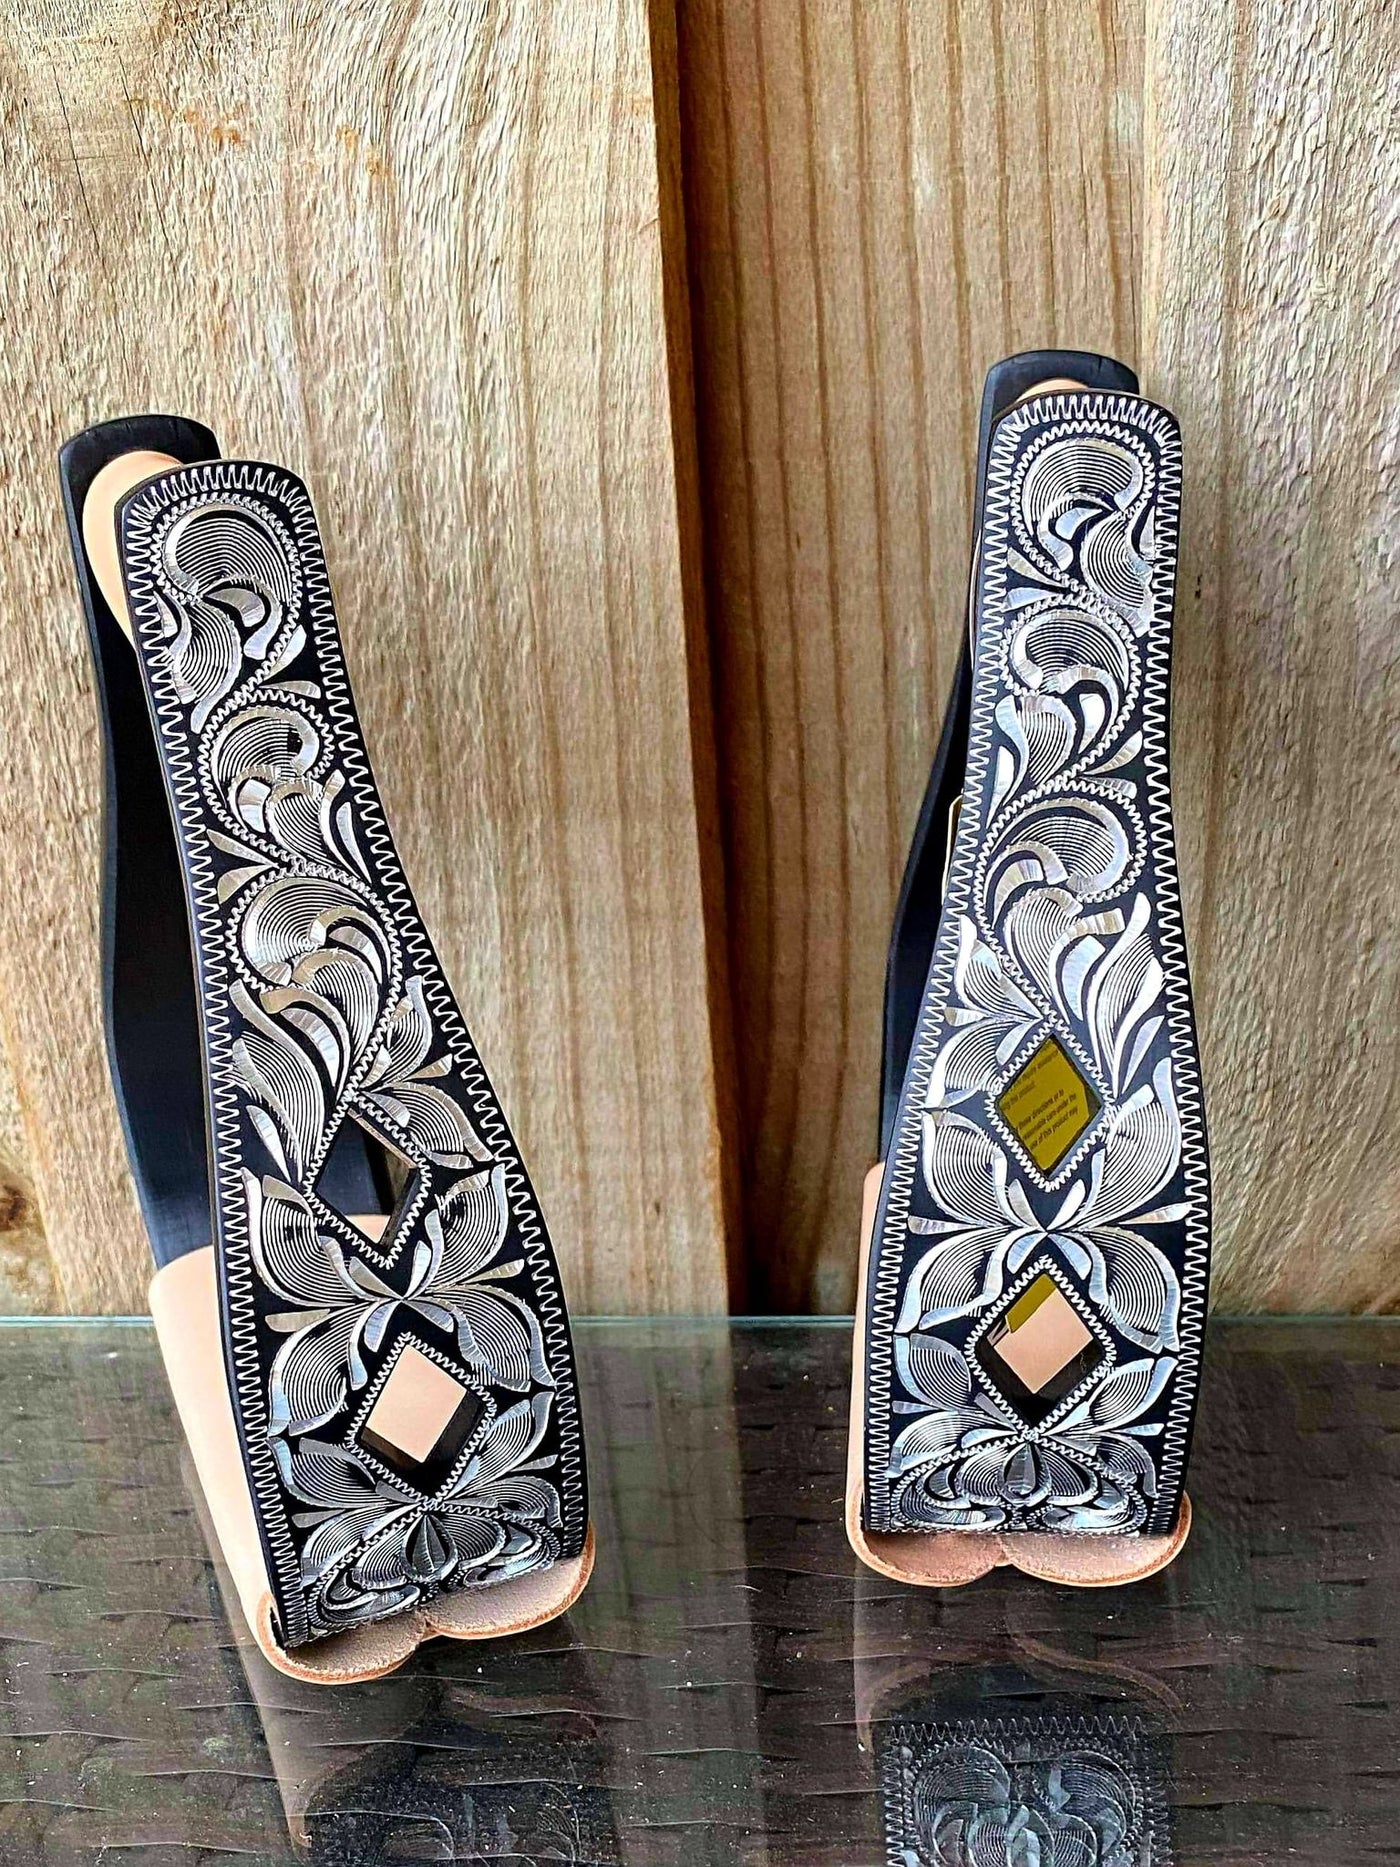 Stirrups - Western Show Black Aluminum stirrups with silver engraving and cut out diamond design